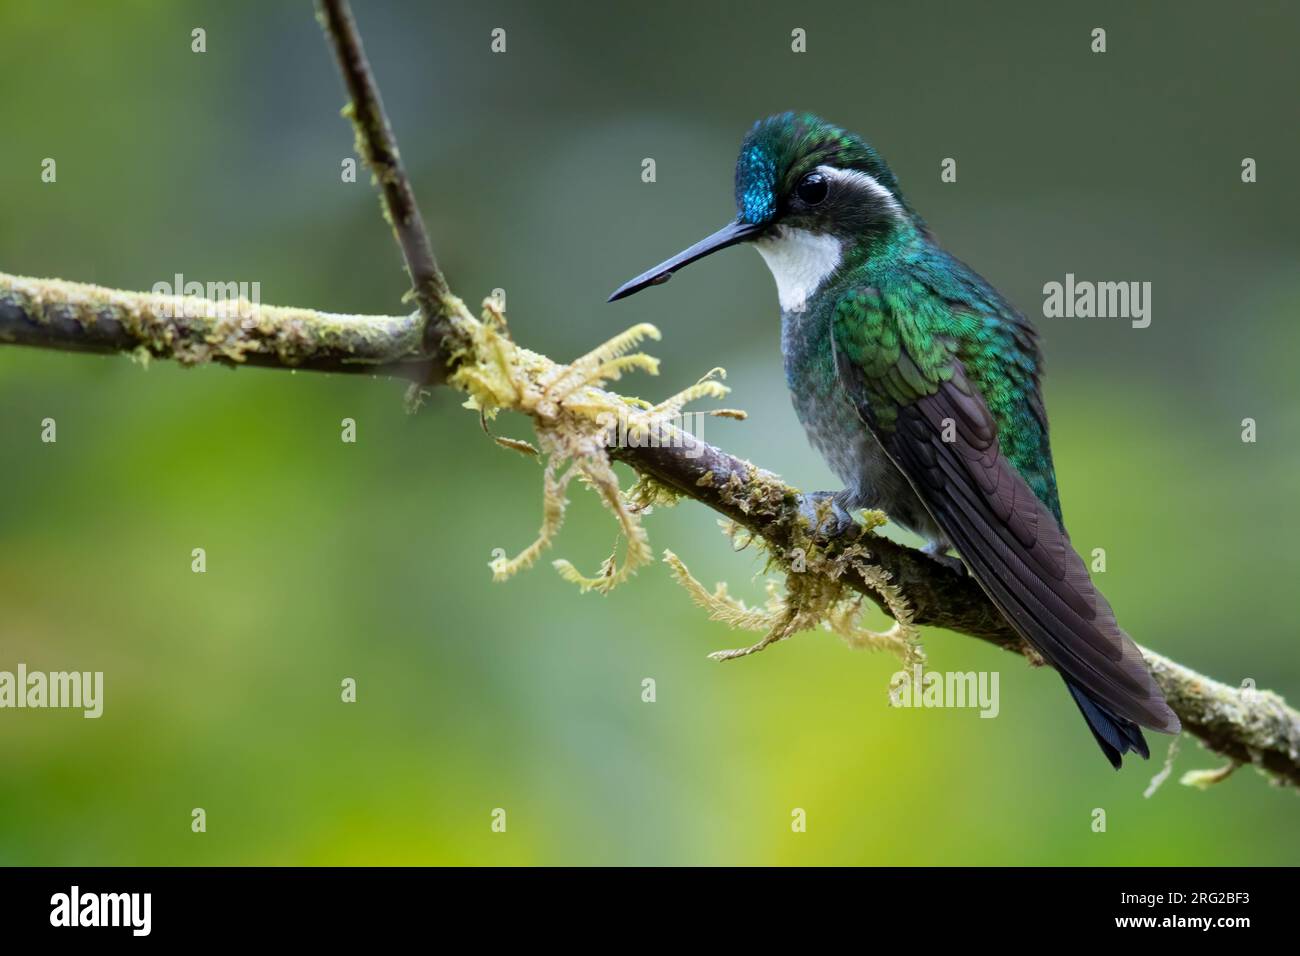 White-throated Mountaingem (Lampornis castaneoventris) perched on a branch, against a green background, in a montane rainforest in Panama. Stock Photo